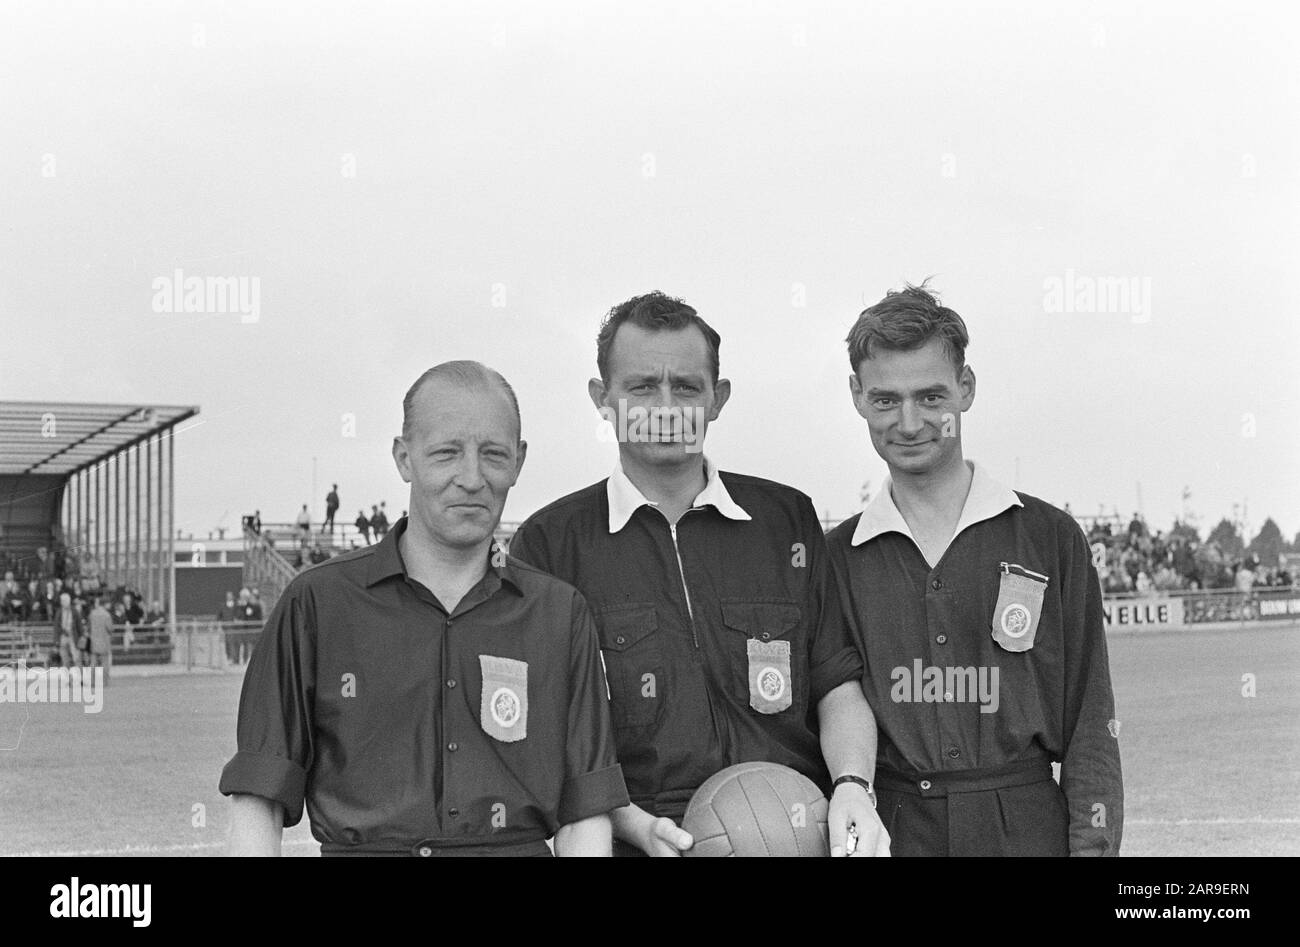 Volewijckers vs. RBC 1-4, number 6A referee B.L. Hoppenbrouwer (m), number 7 and 8 trainer De Bunser (Volenwijck) Date: August 14, 1966 Keywords: referees, sports, trainers, football Institution name: Volewijckers Stock Photo